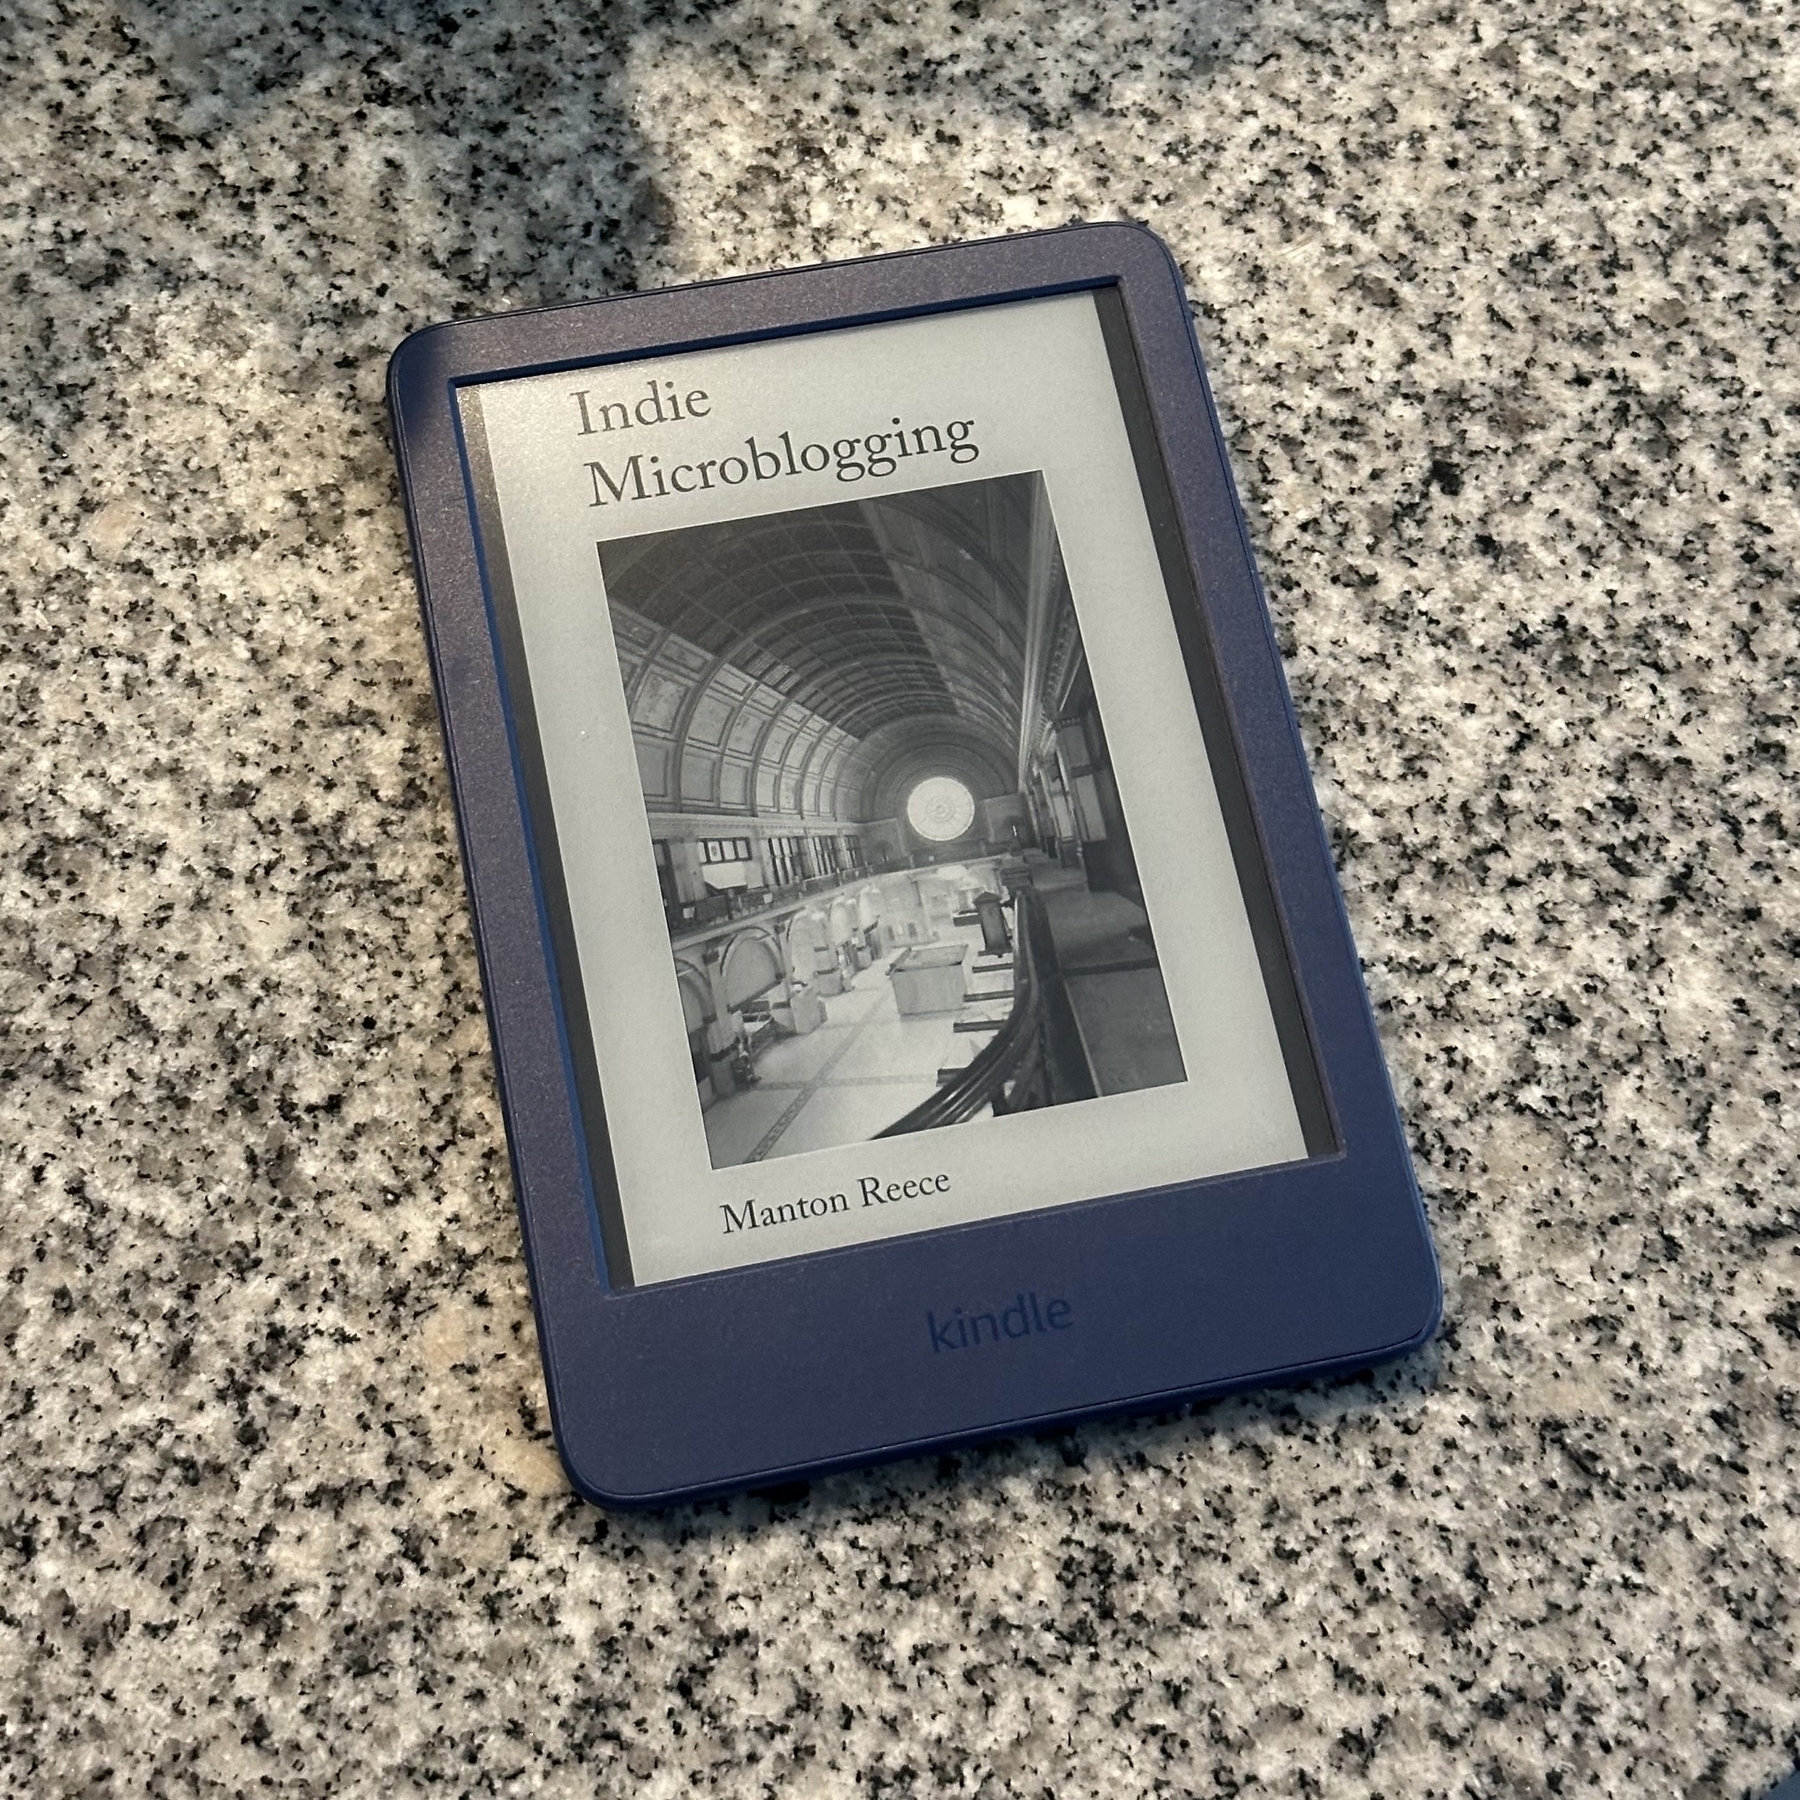 Kindle with book cover of Indie Microblogging shown.